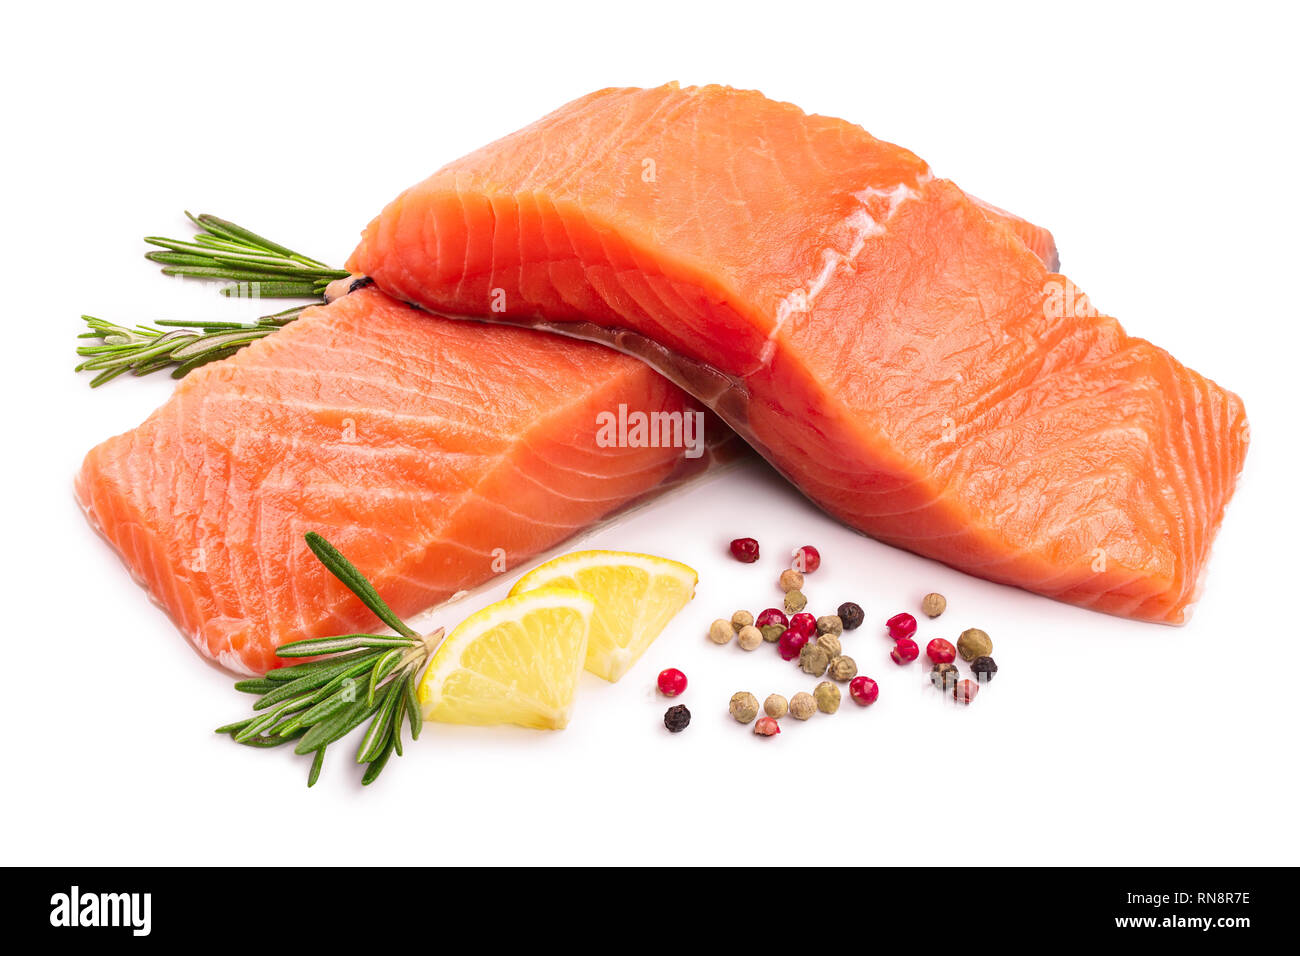 fillet of red fish salmon with lemon and rosemary isolated on white background Stock Photo